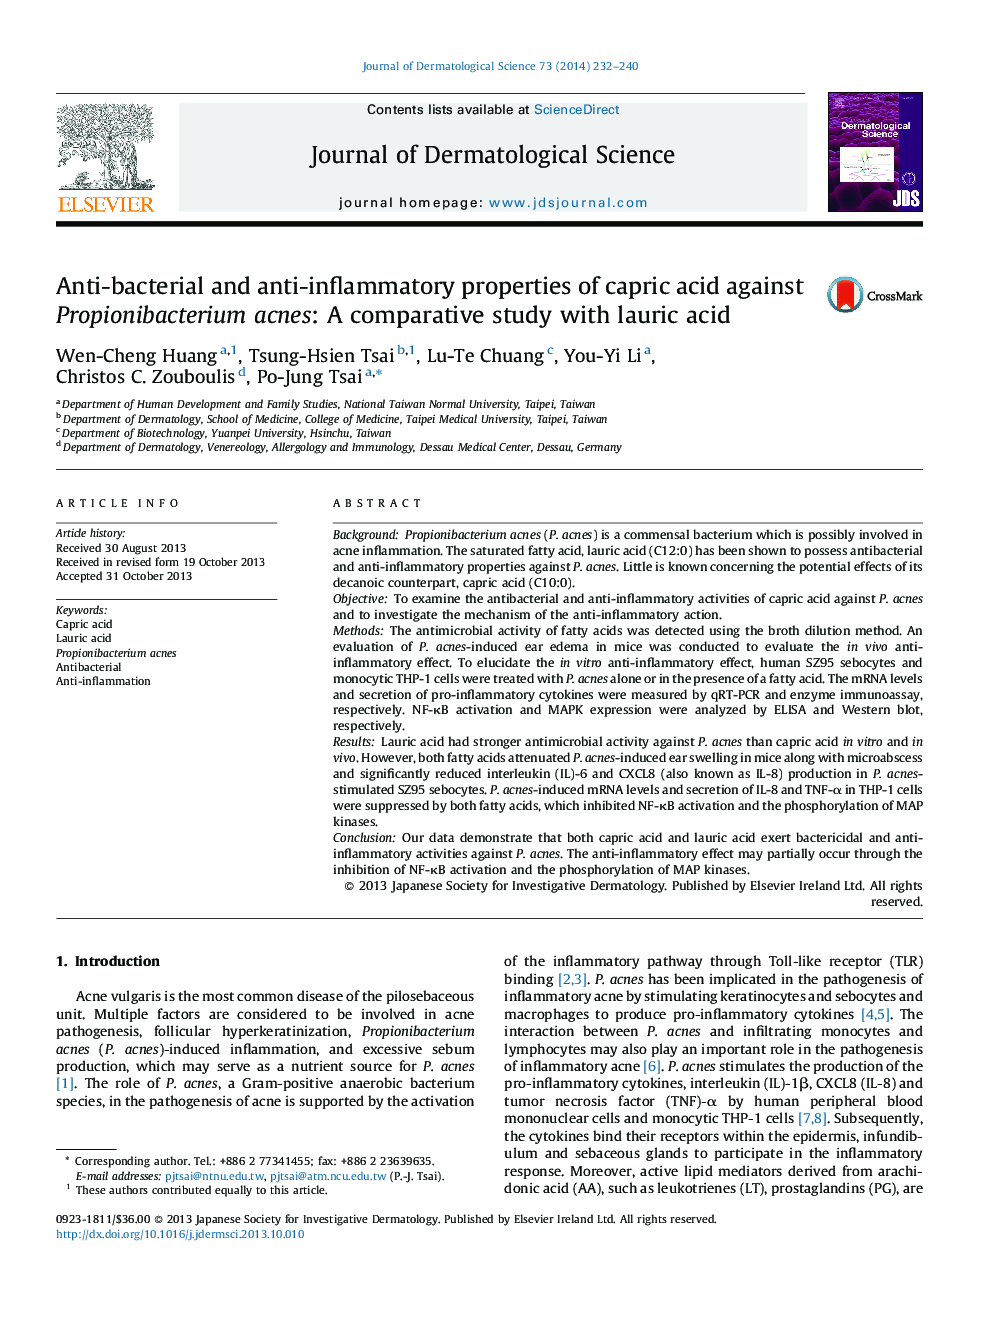 Anti-bacterial and anti-inflammatory properties of capric acid against Propionibacterium acnes: A comparative study with lauric acid